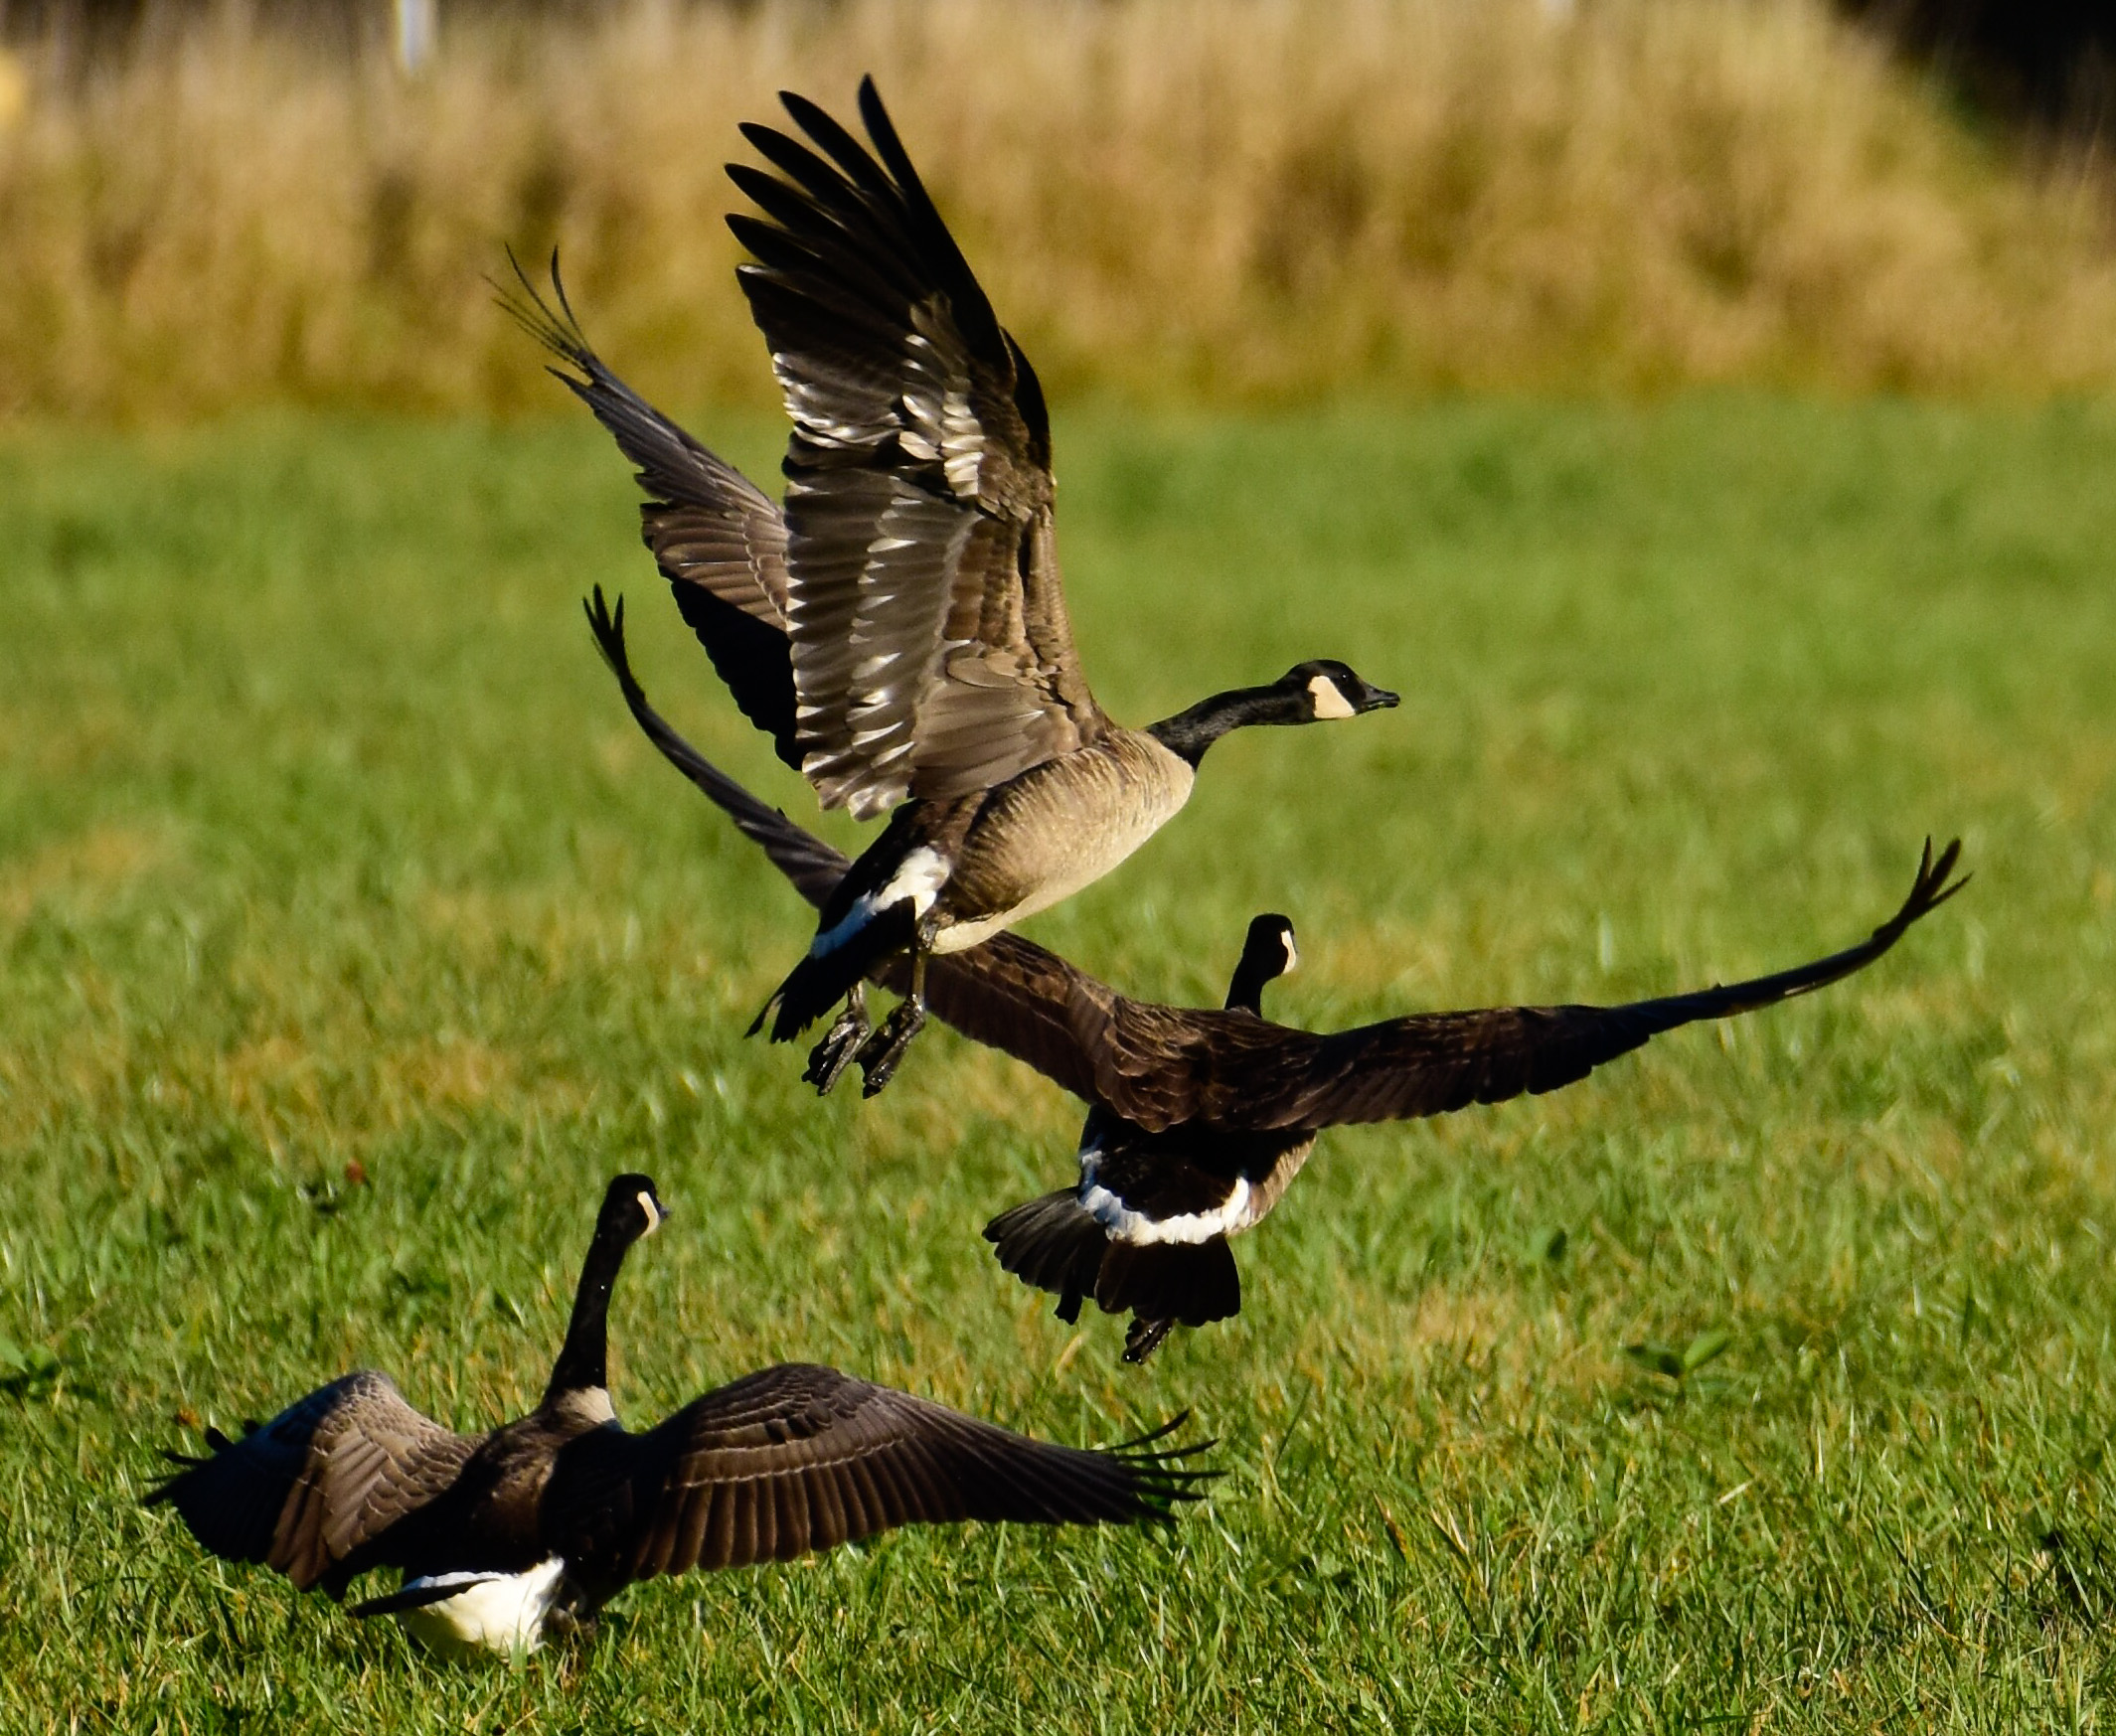 Canada Geese Taking Off